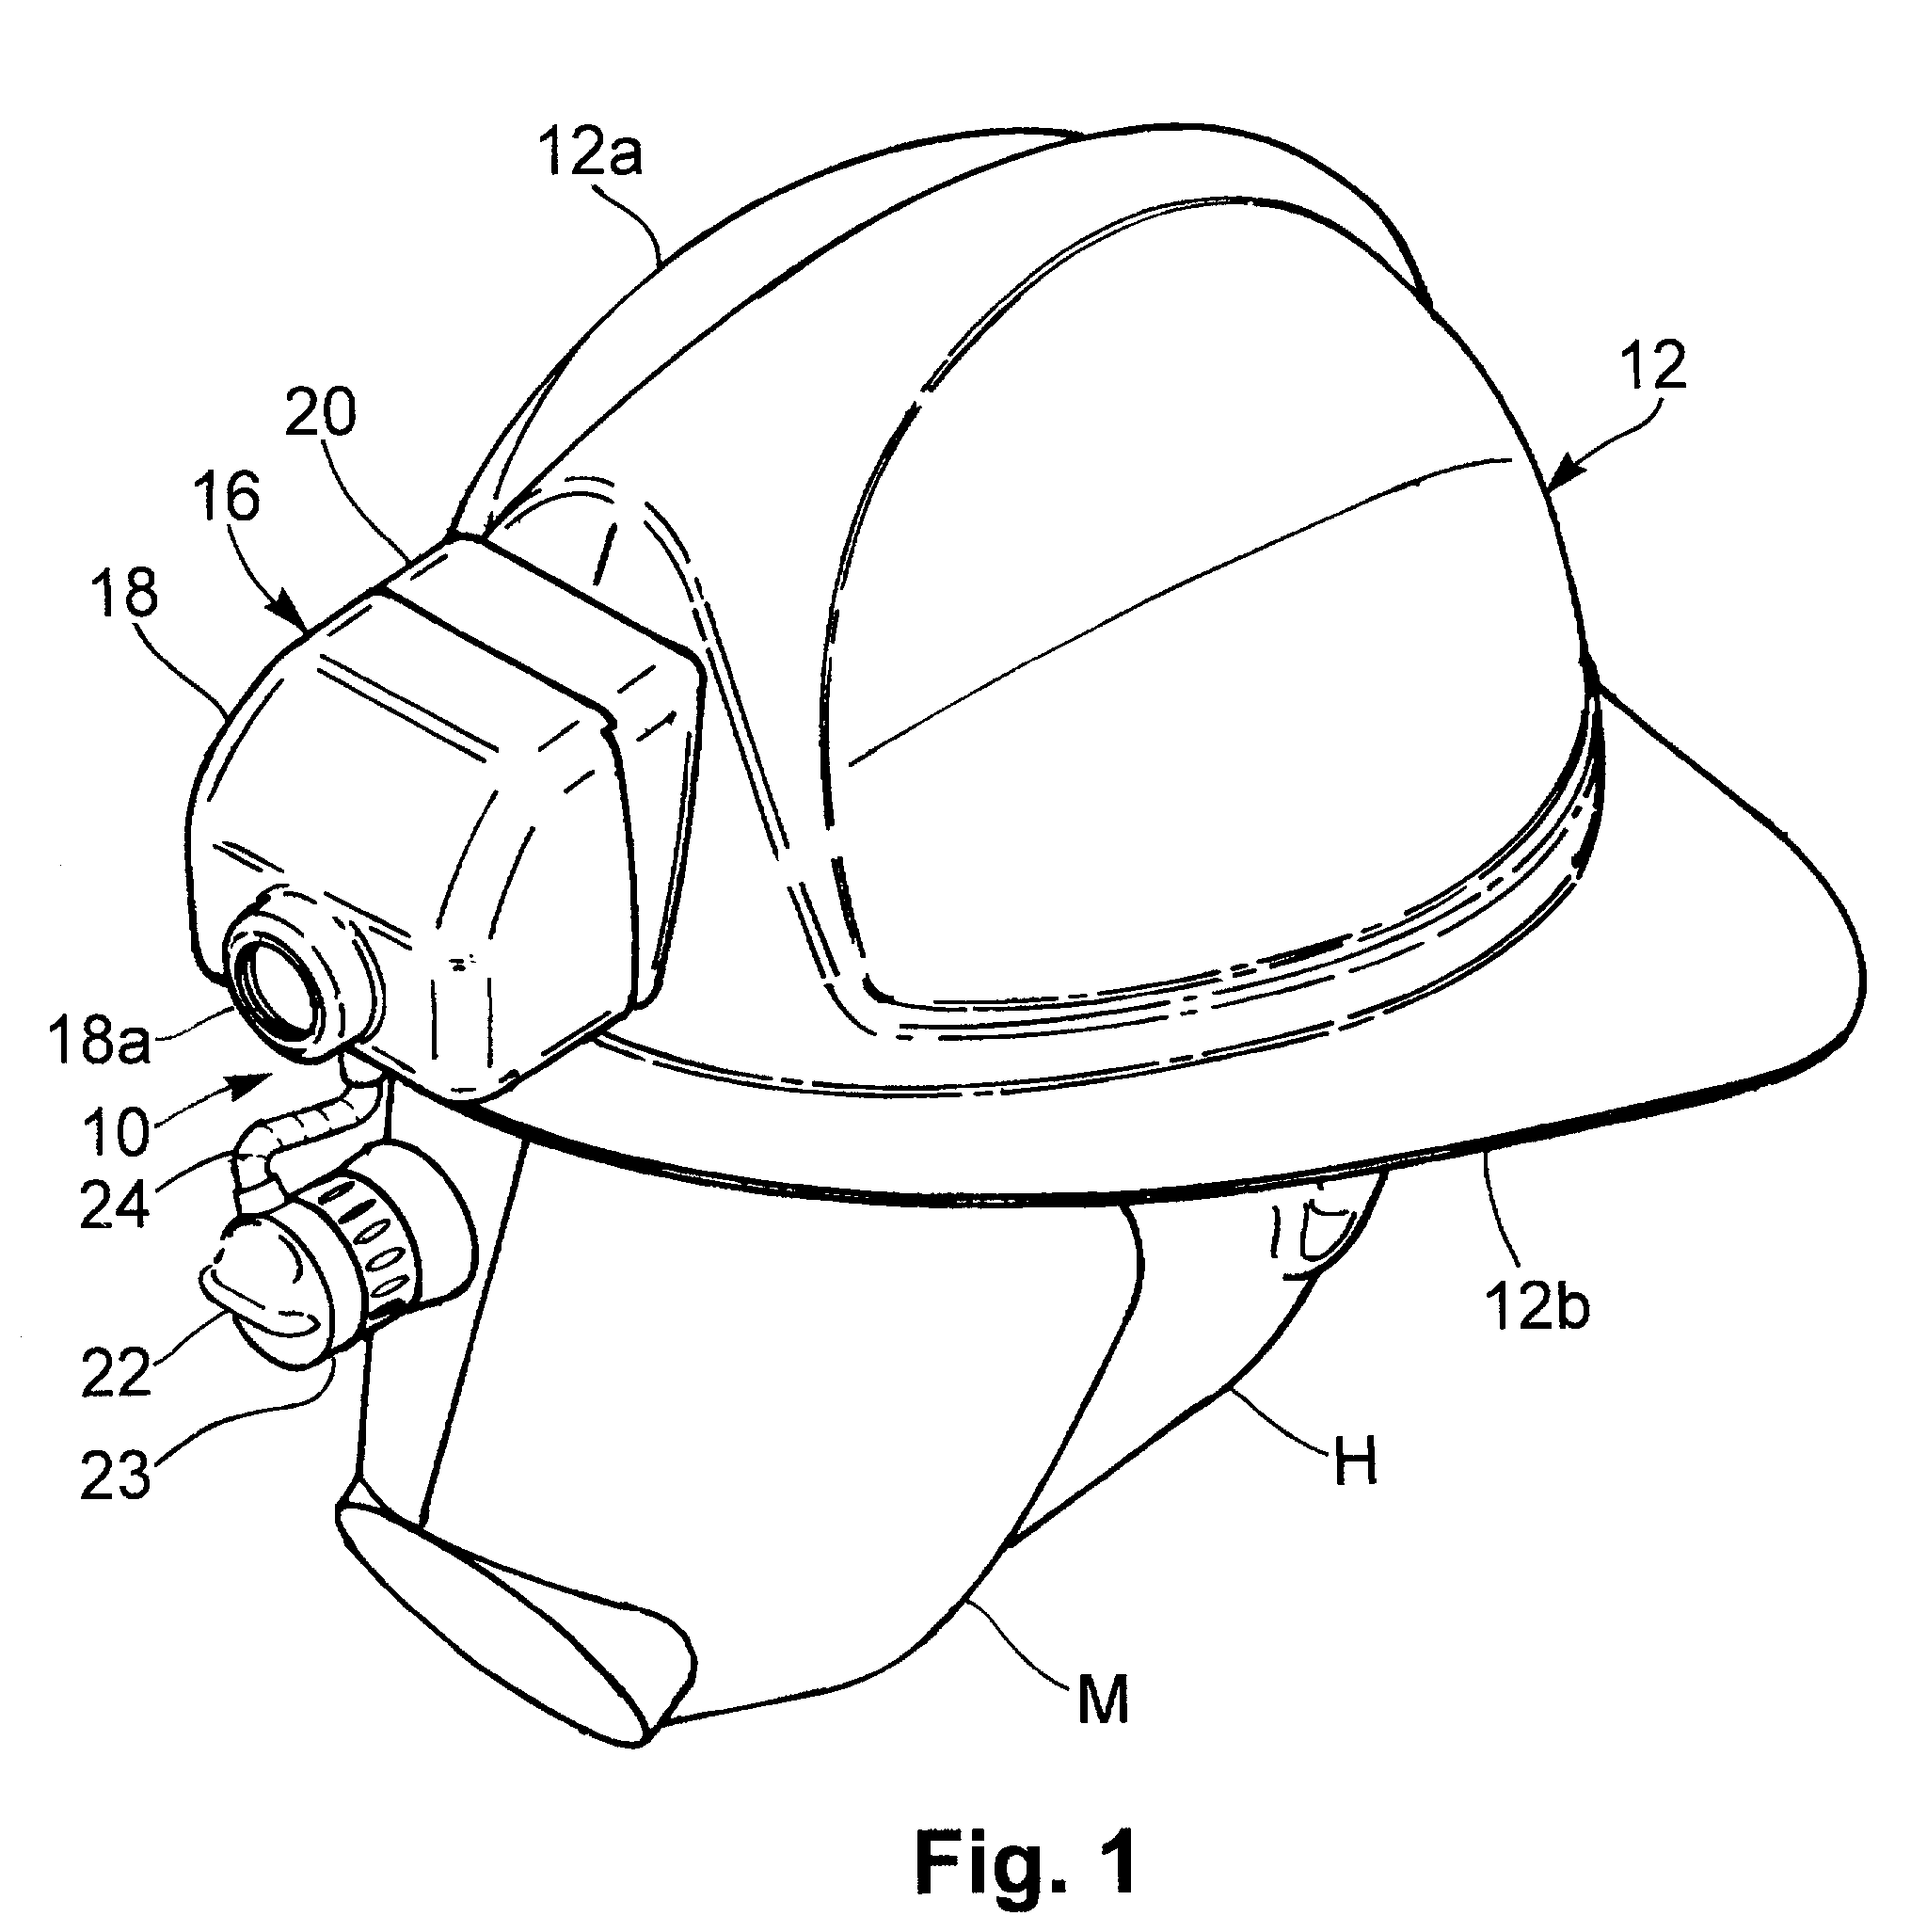 Helmet-mounted thermal imaging system